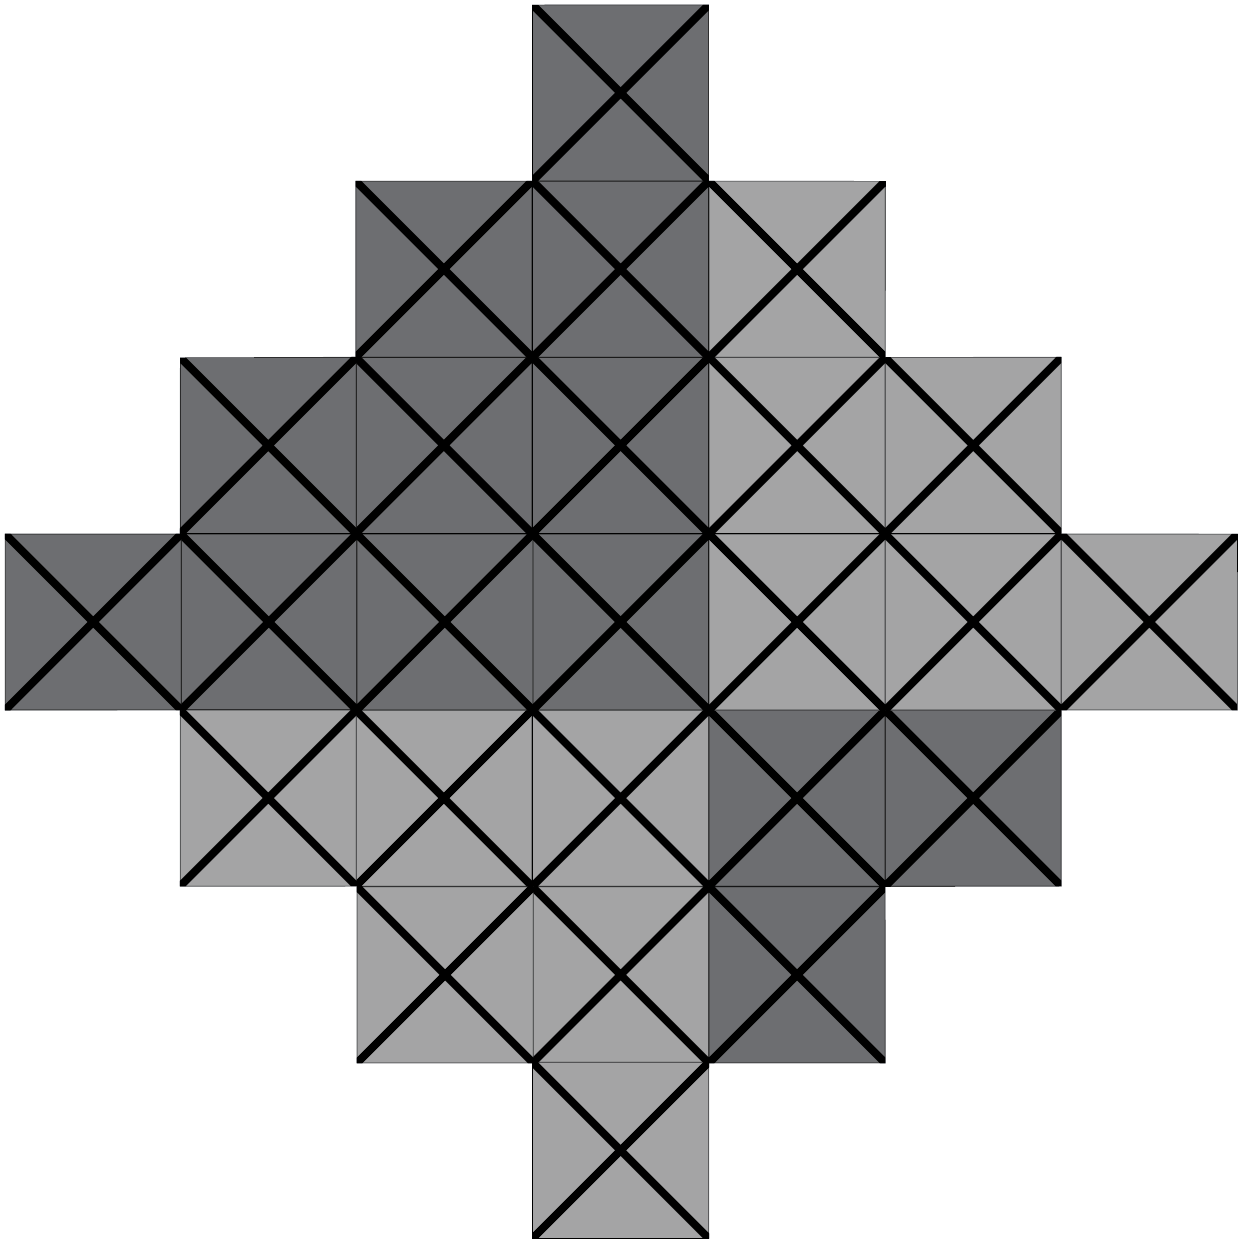 The fourth patiki pattern from Copymaster 2.